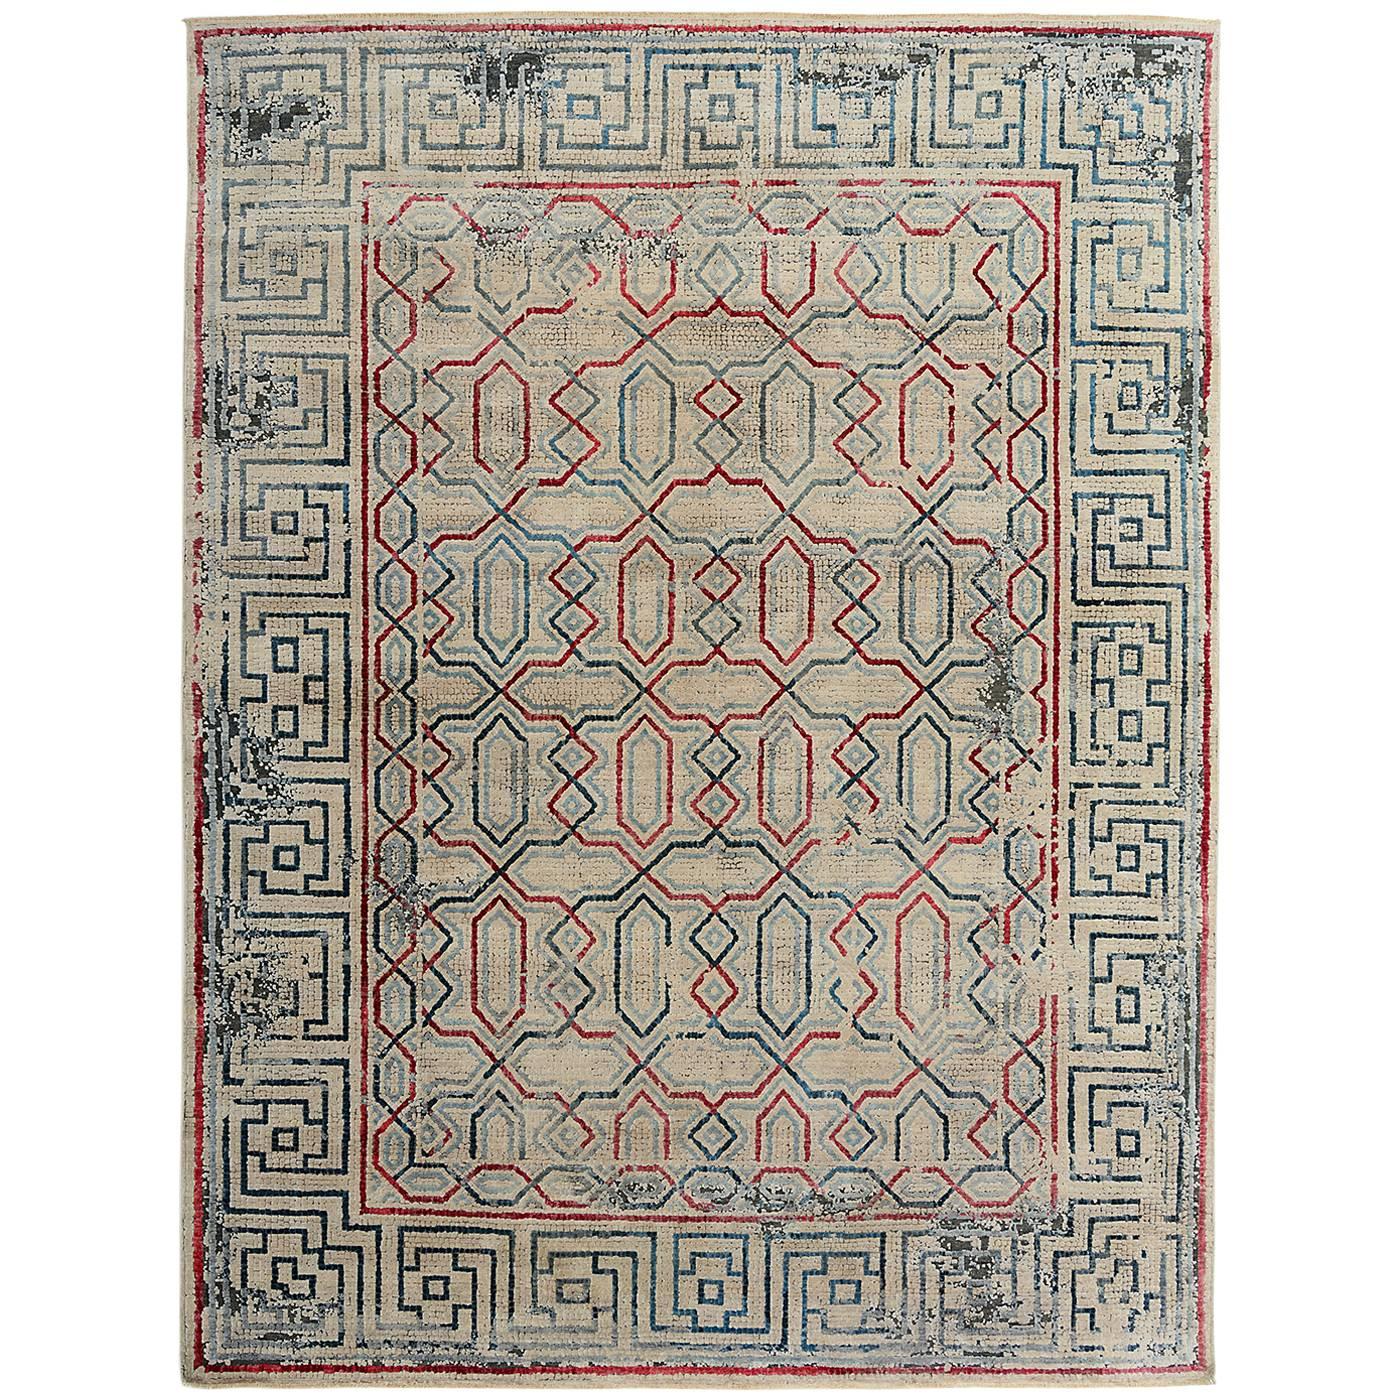 Luke Irwin Rugs, Claudius, The Mosaic Collection For Sale